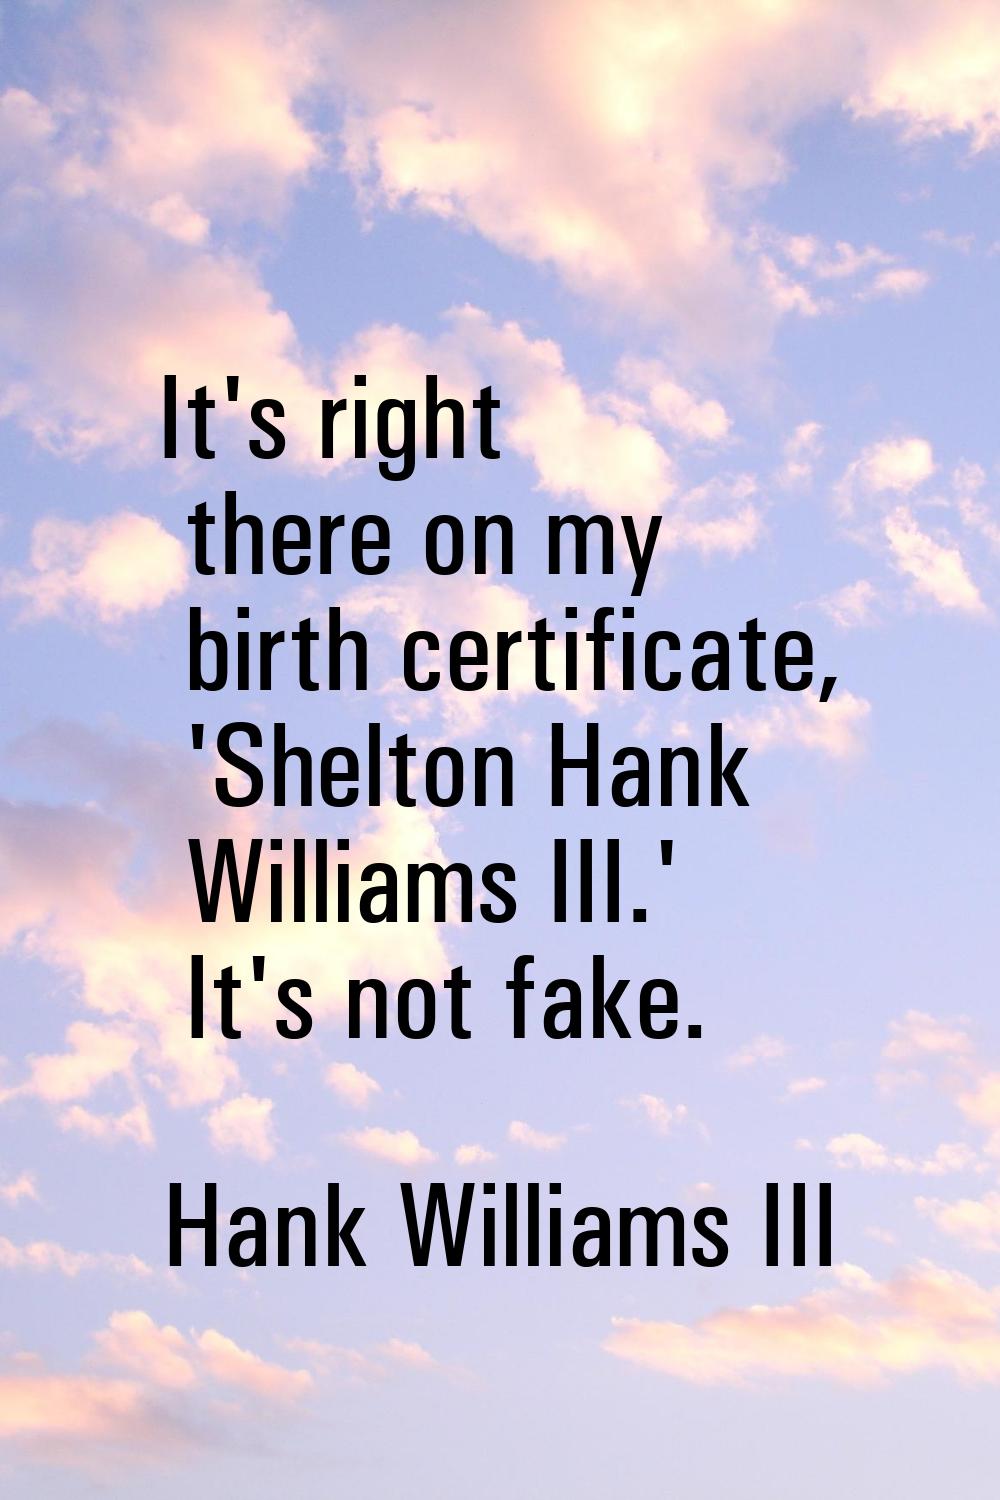 It's right there on my birth certificate, 'Shelton Hank Williams III.' It's not fake.